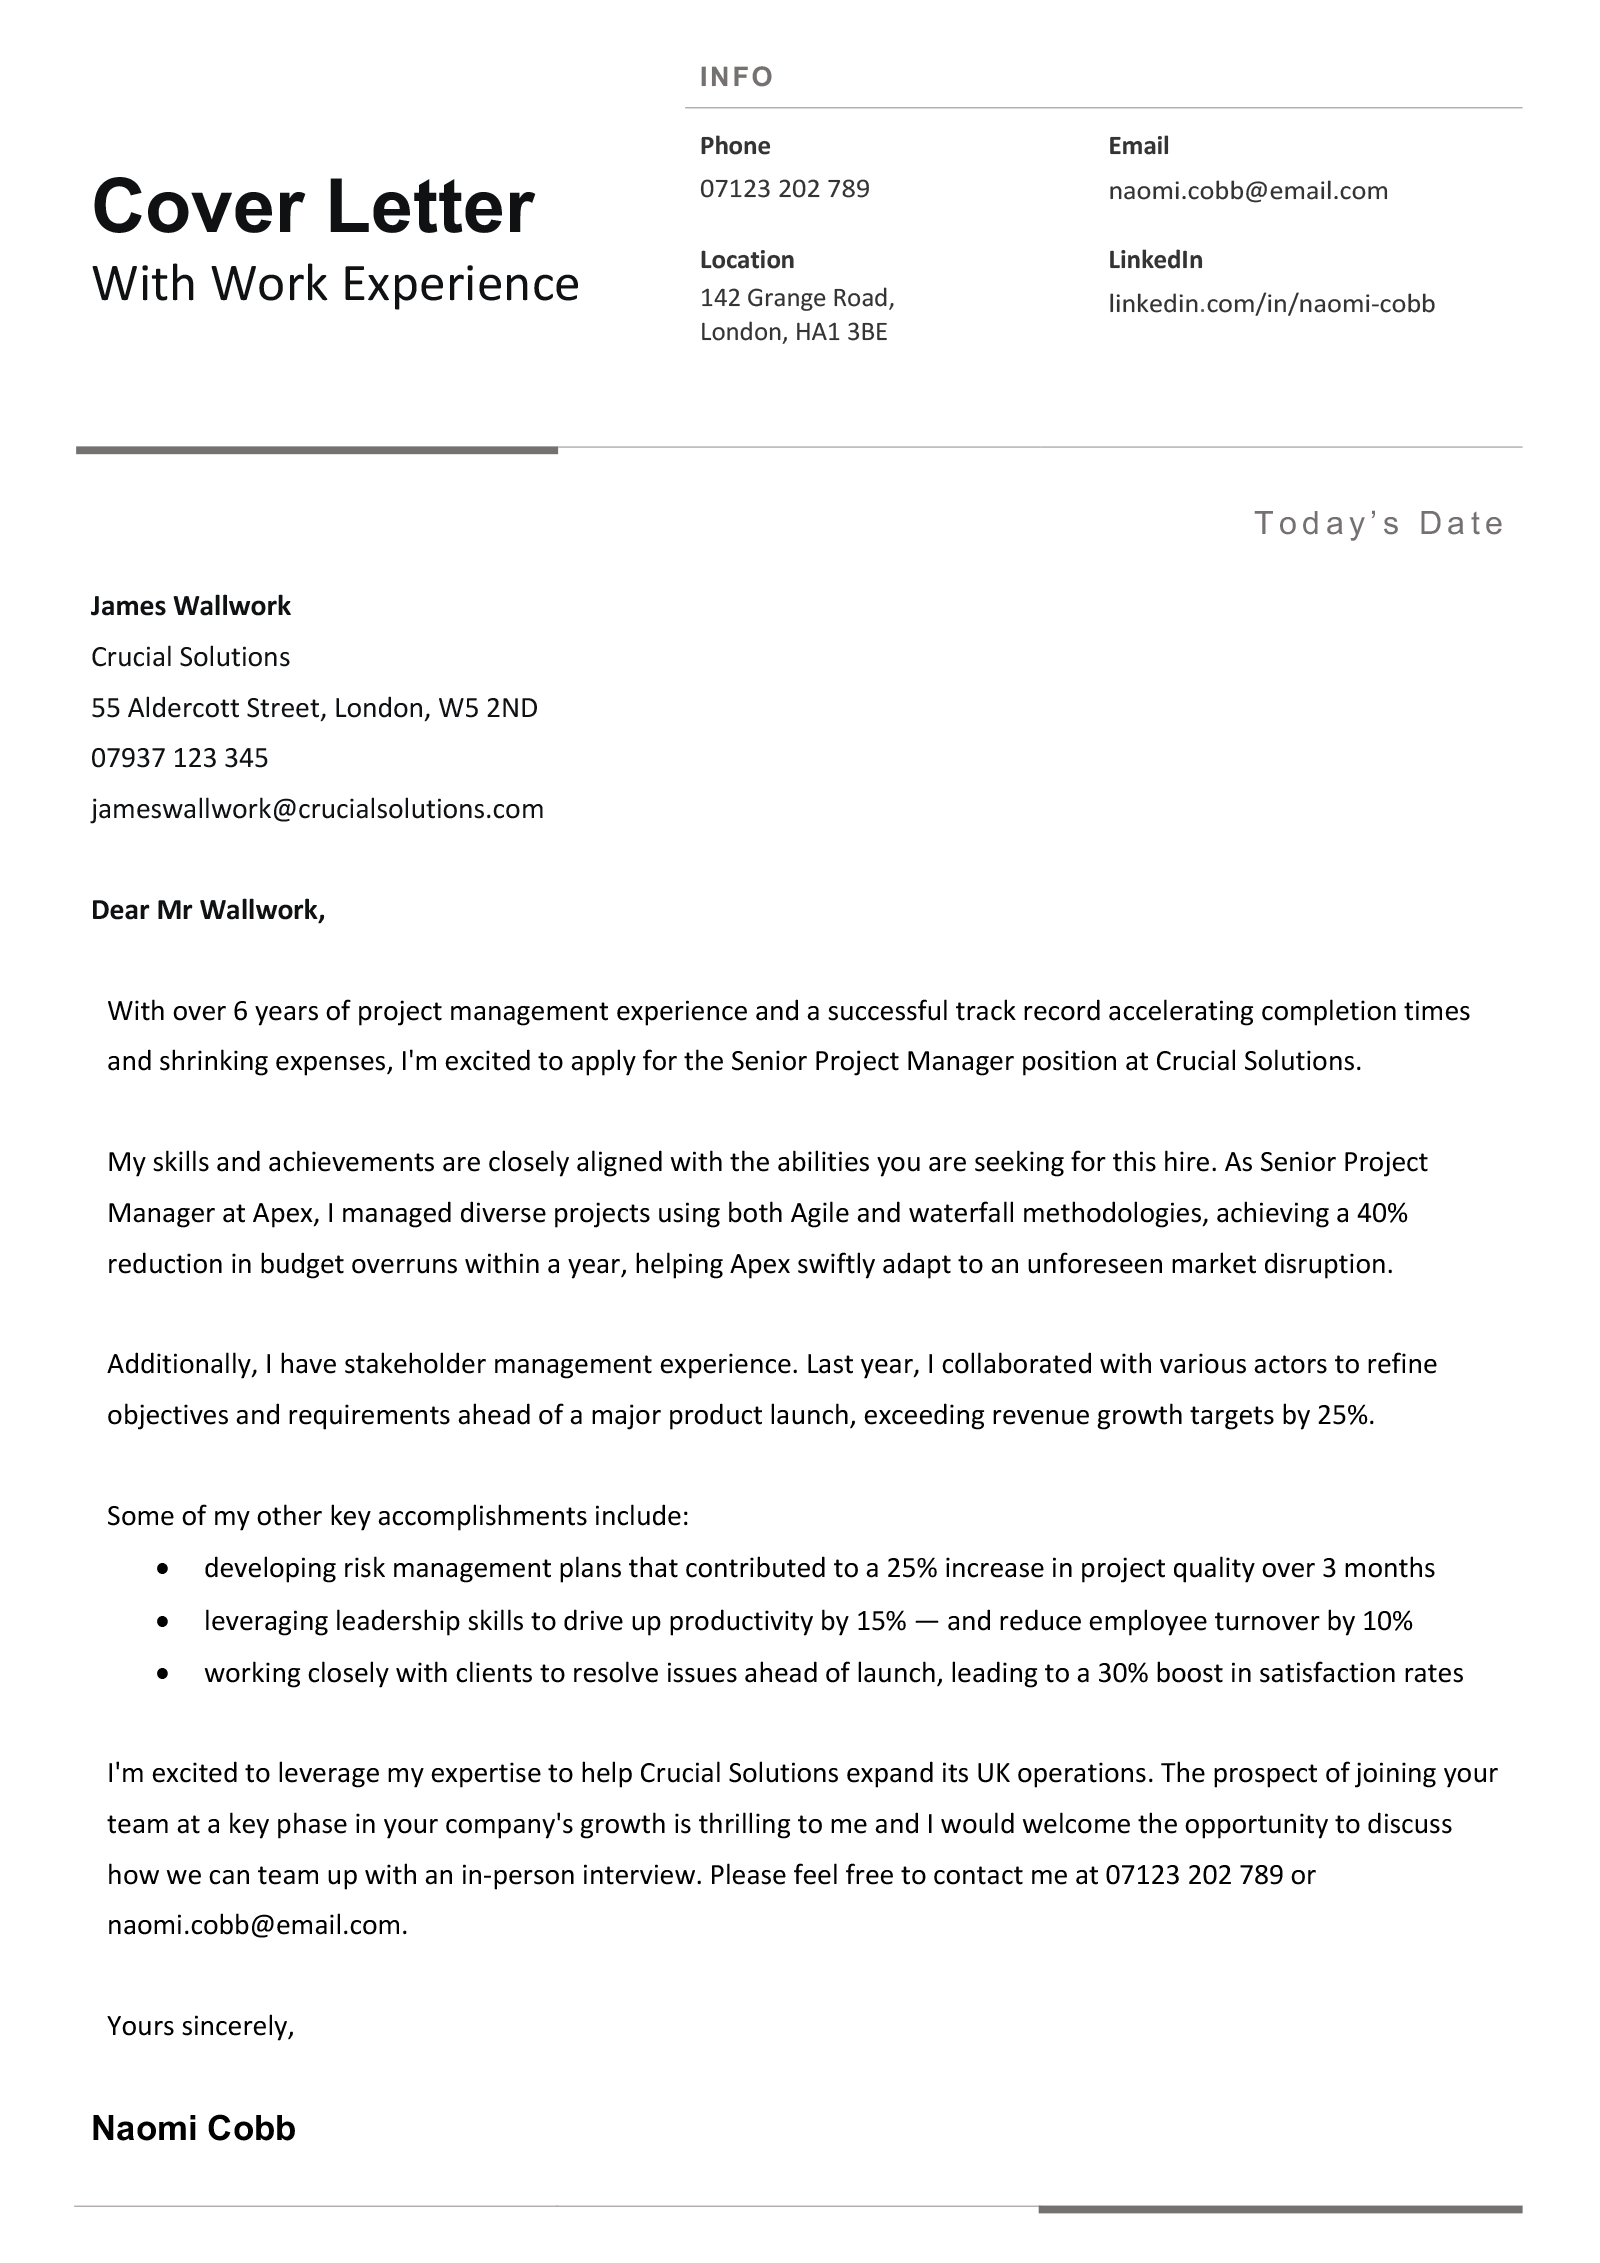 An example of a cover letter written by an experienced individual